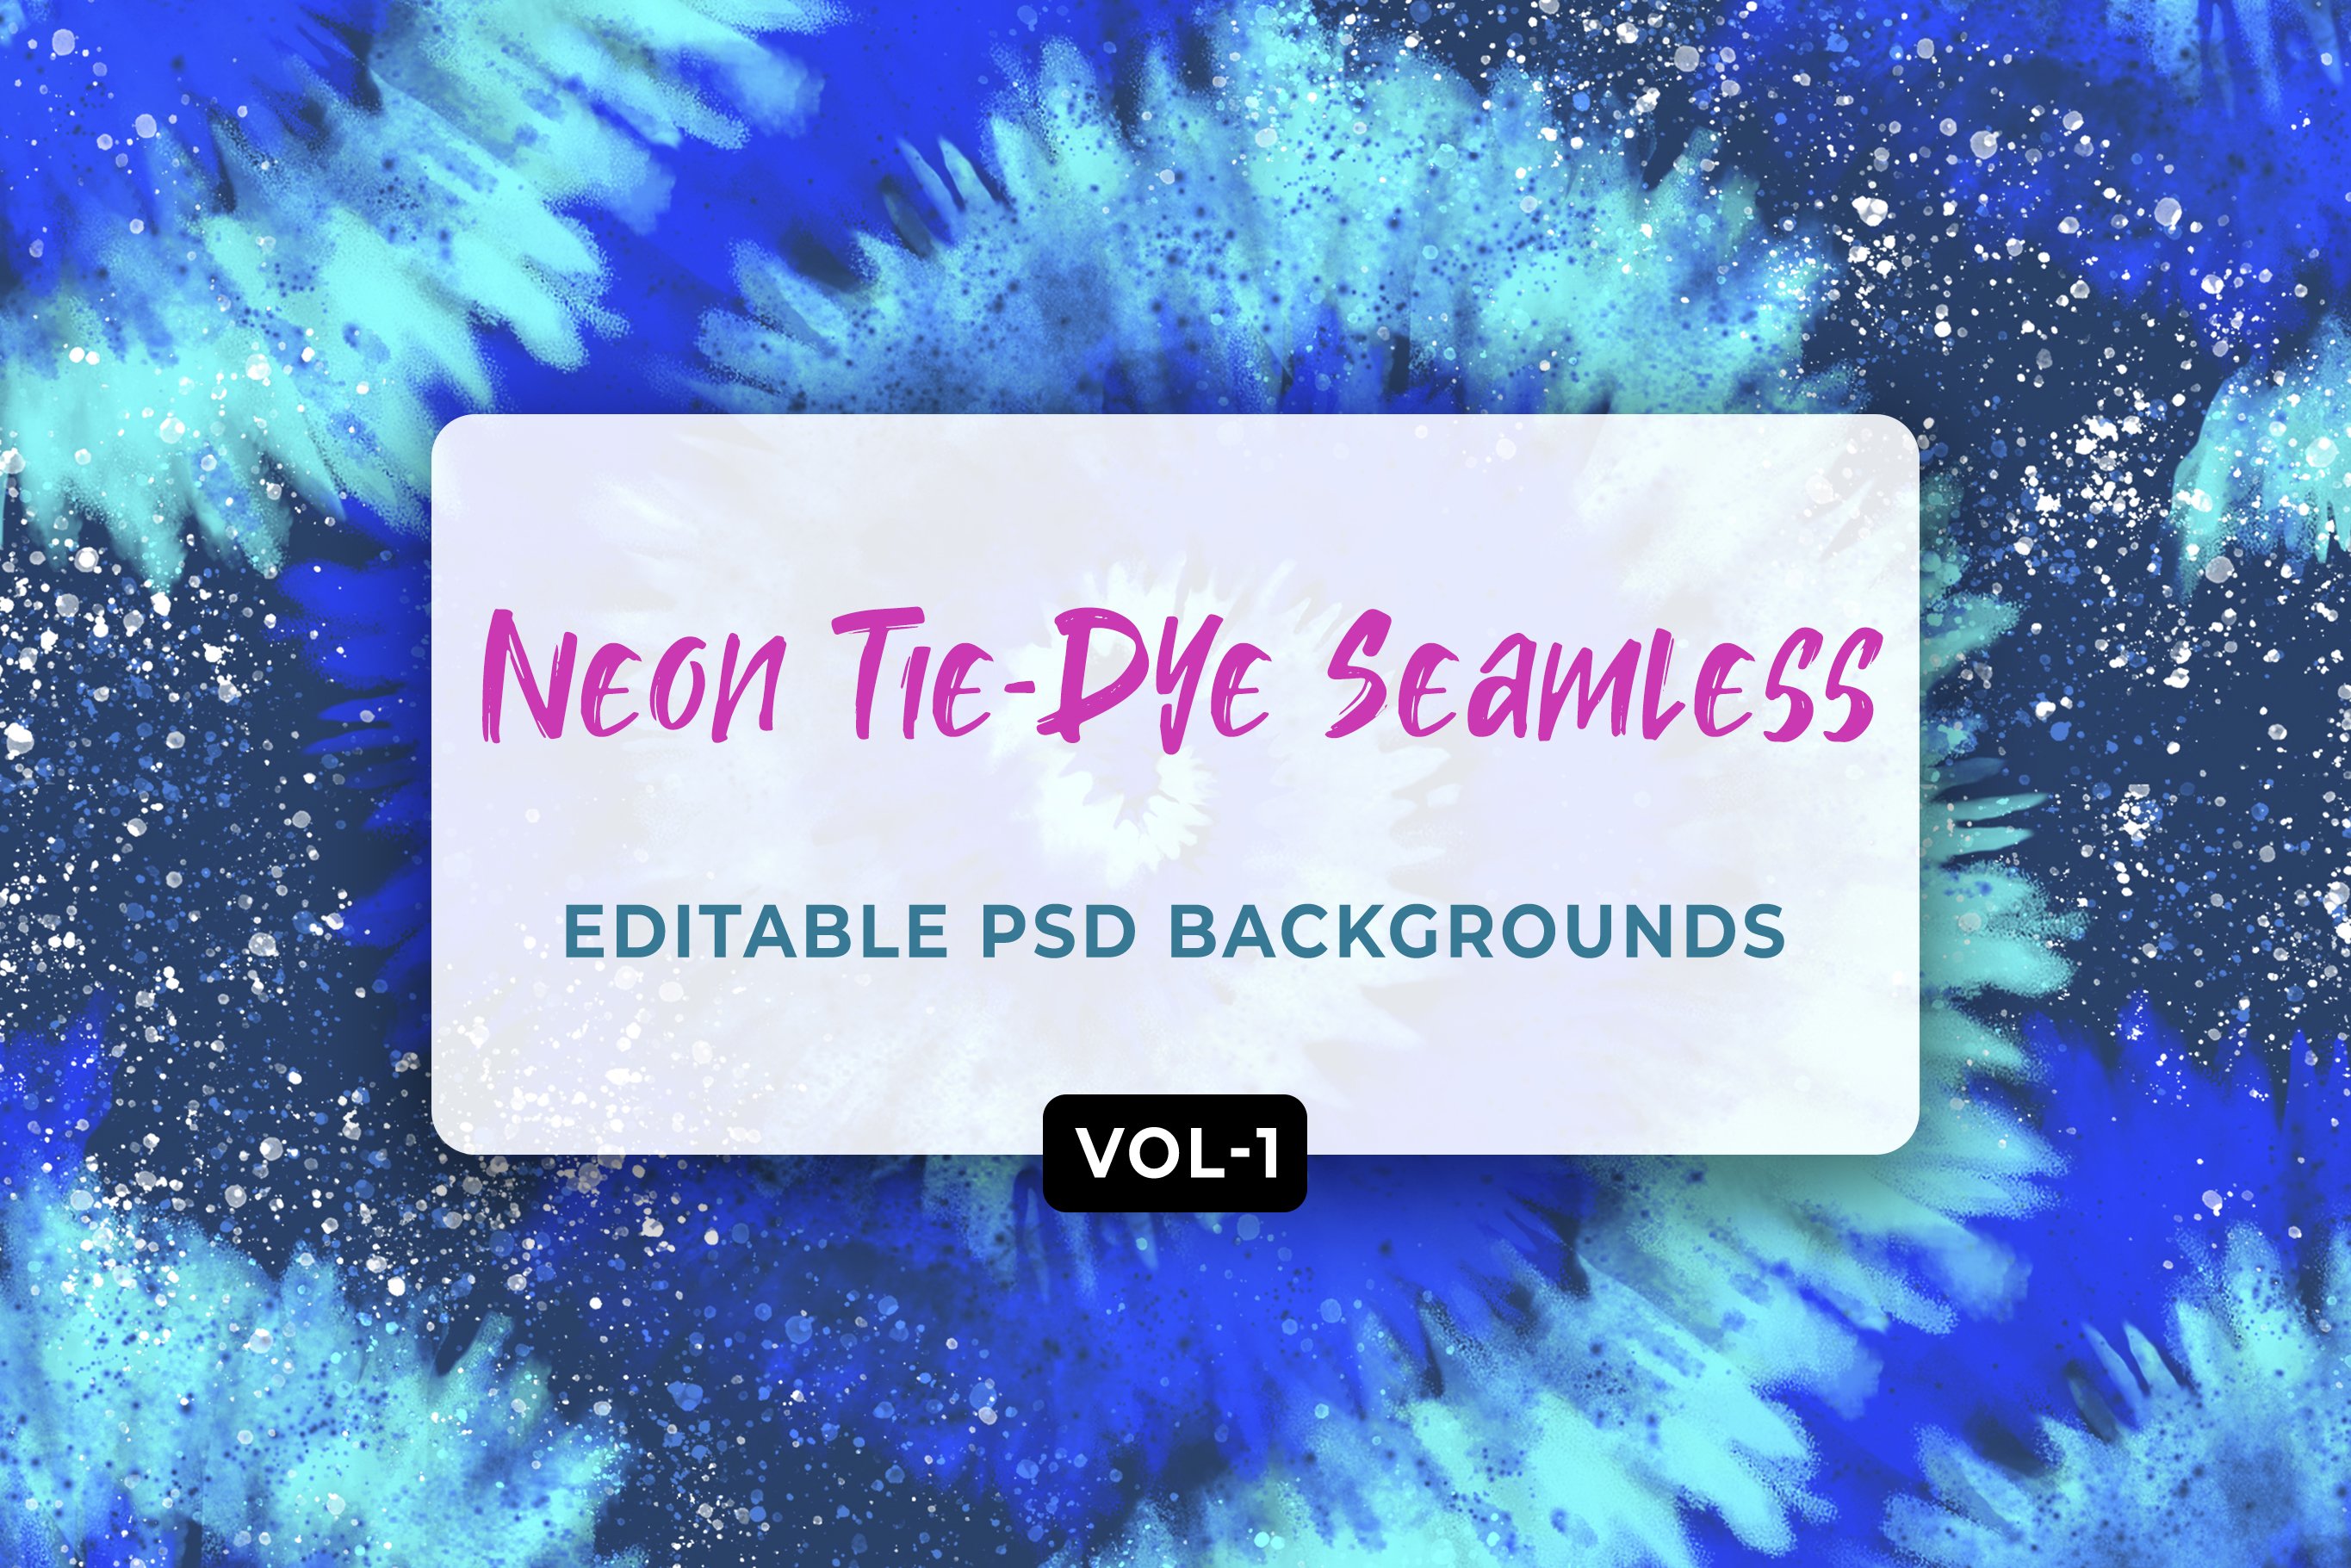 Neon Tie-Dye Seamless Patterns V-01 cover image.